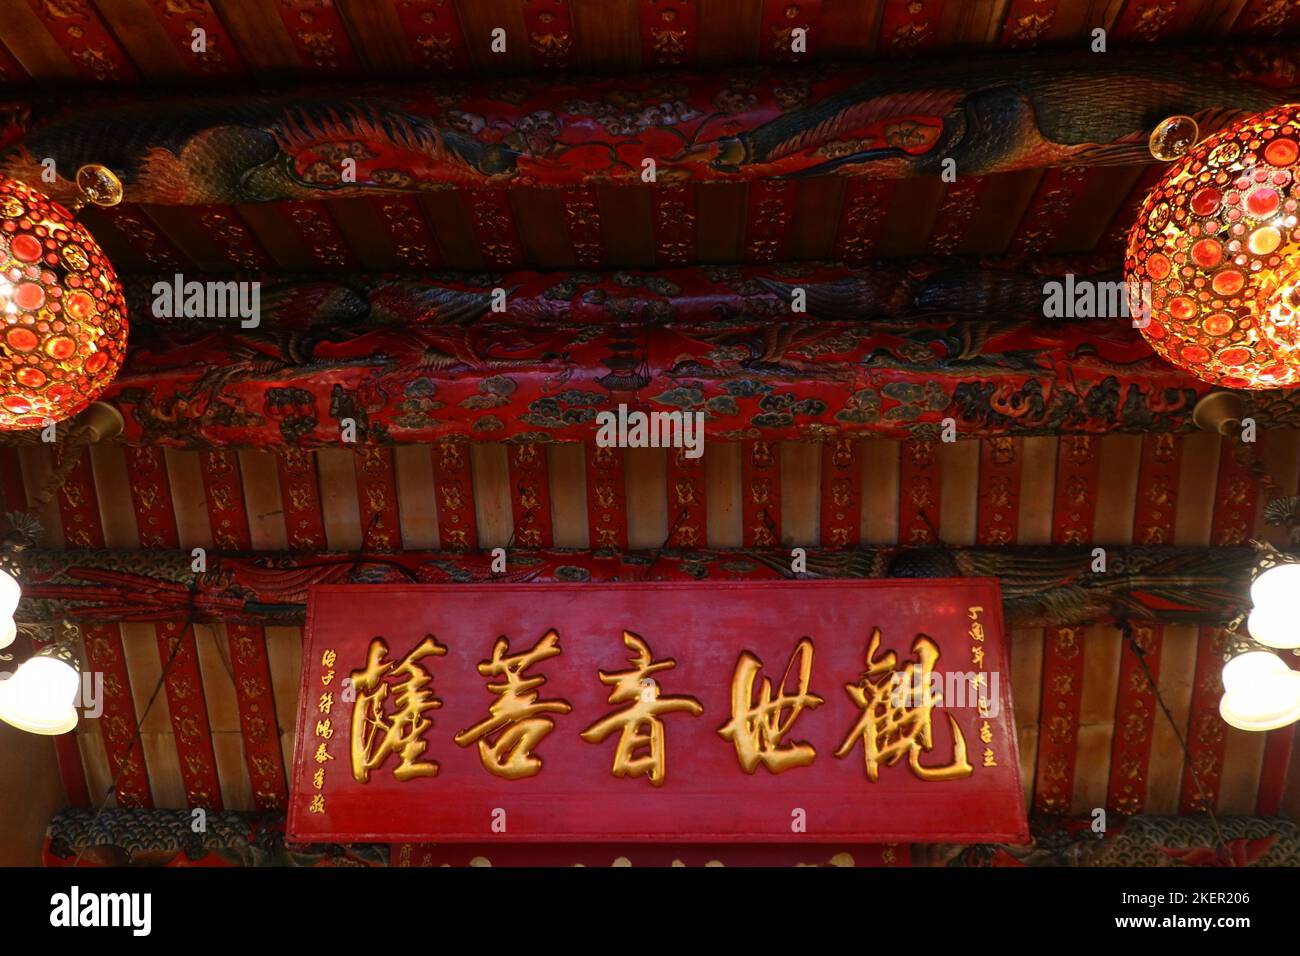 Chinese carved red signboard in old shrine Stock Photo